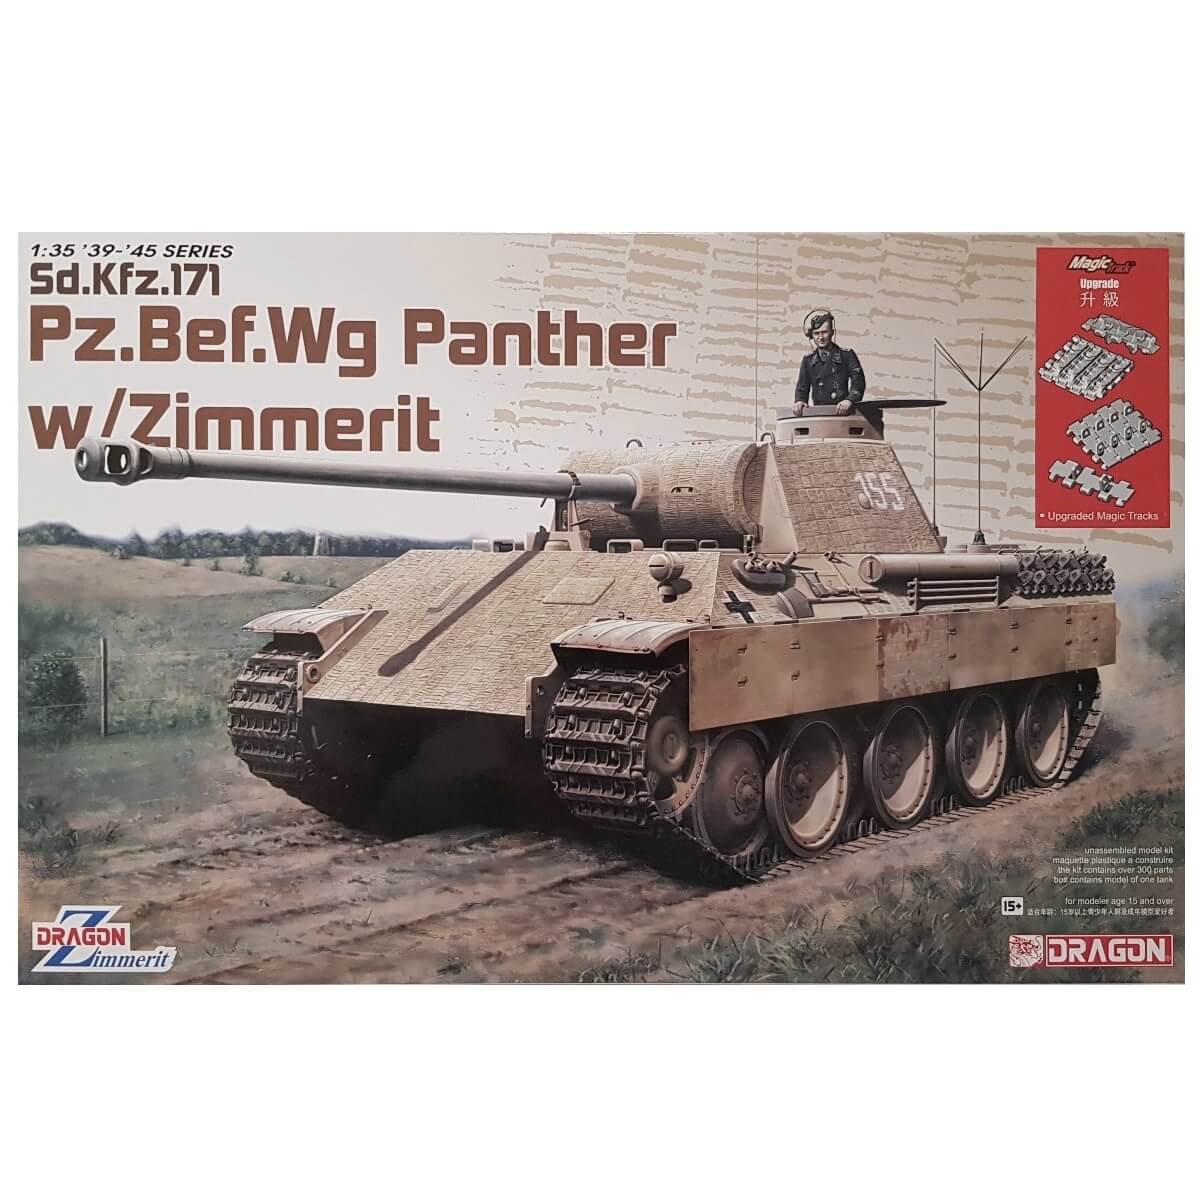 1:35 Sd.Kfz. 171 Pz.Bef.Wg Panther with Zimmerit - DRAGON